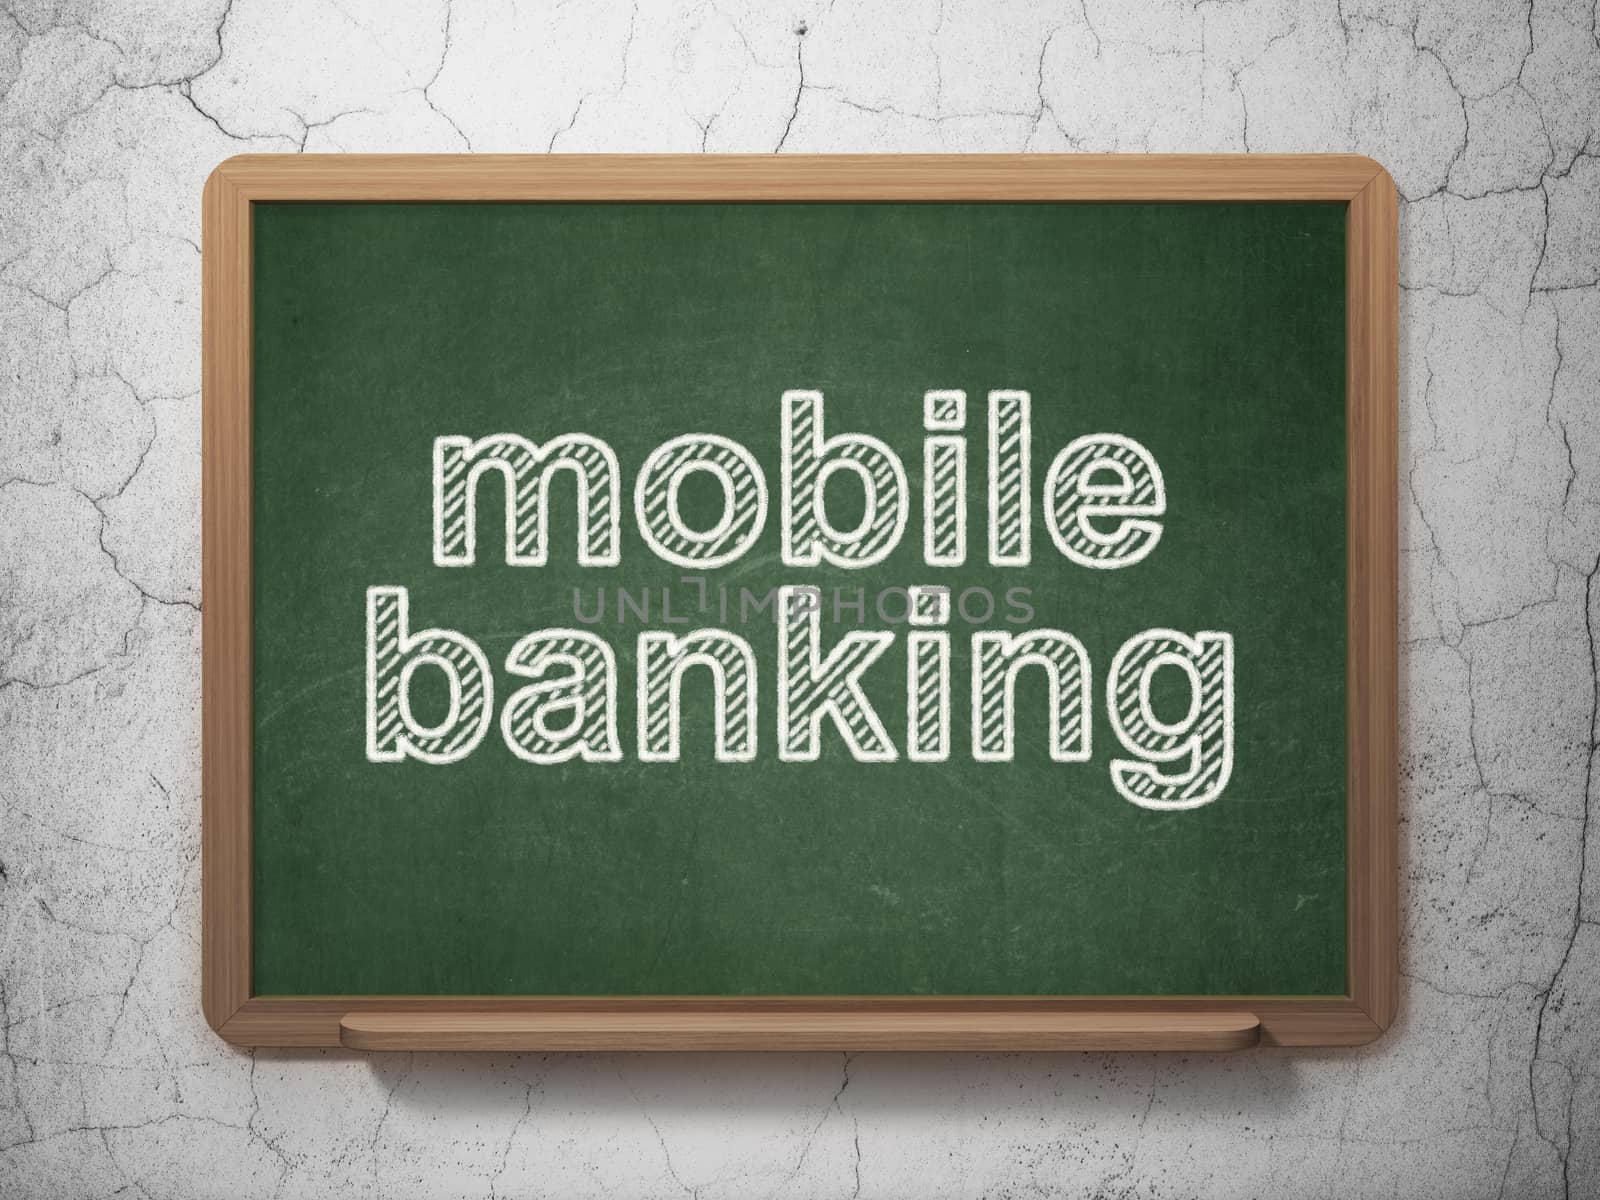 Banking concept: Mobile Banking on chalkboard background by maxkabakov